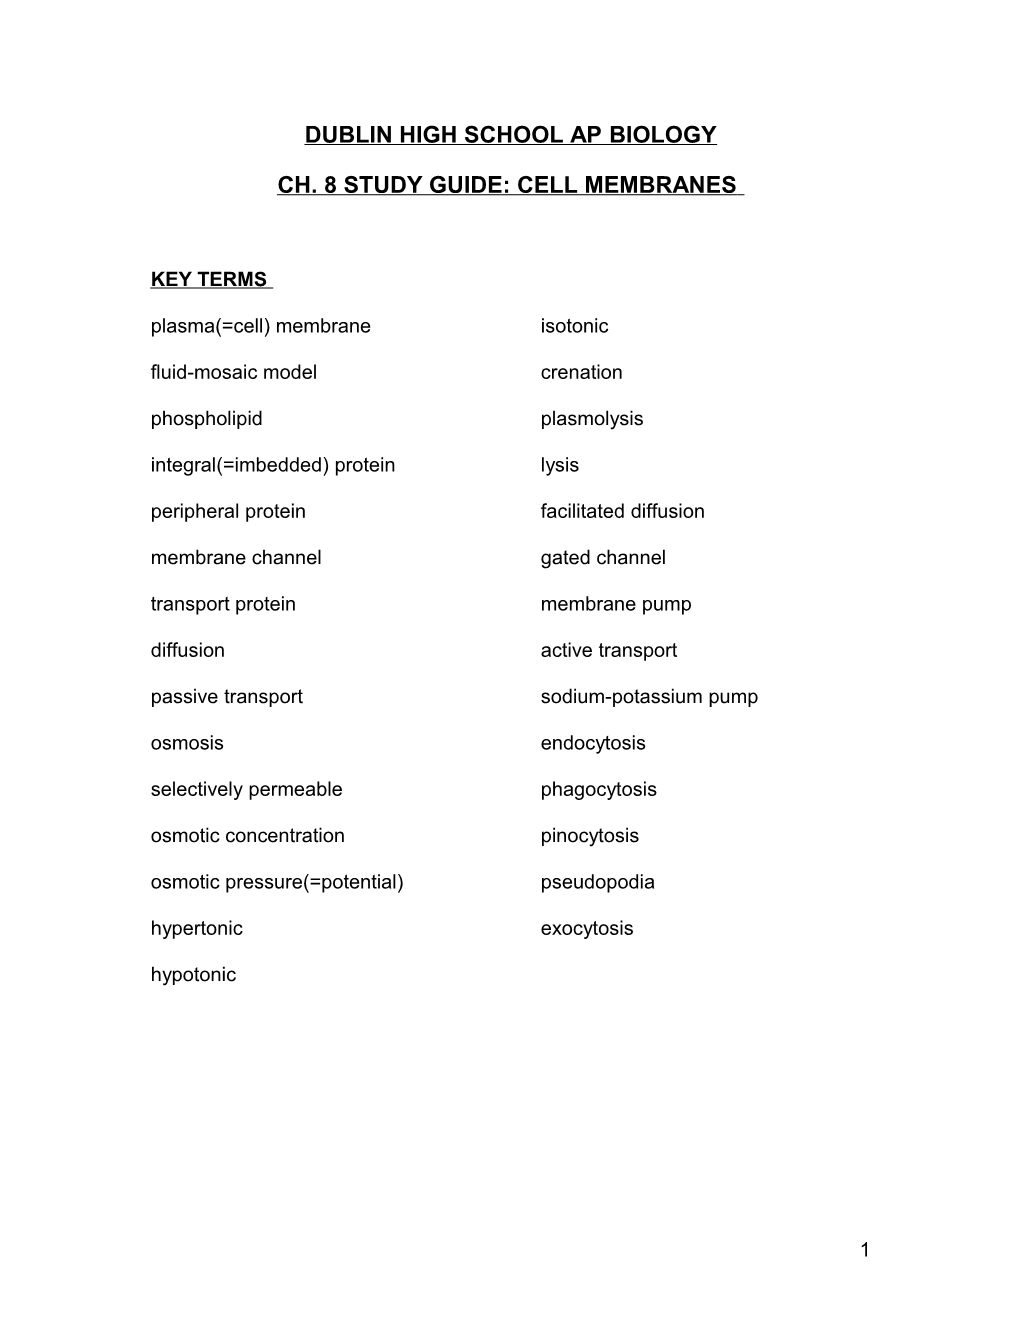 Study Guide: Cell Membranes